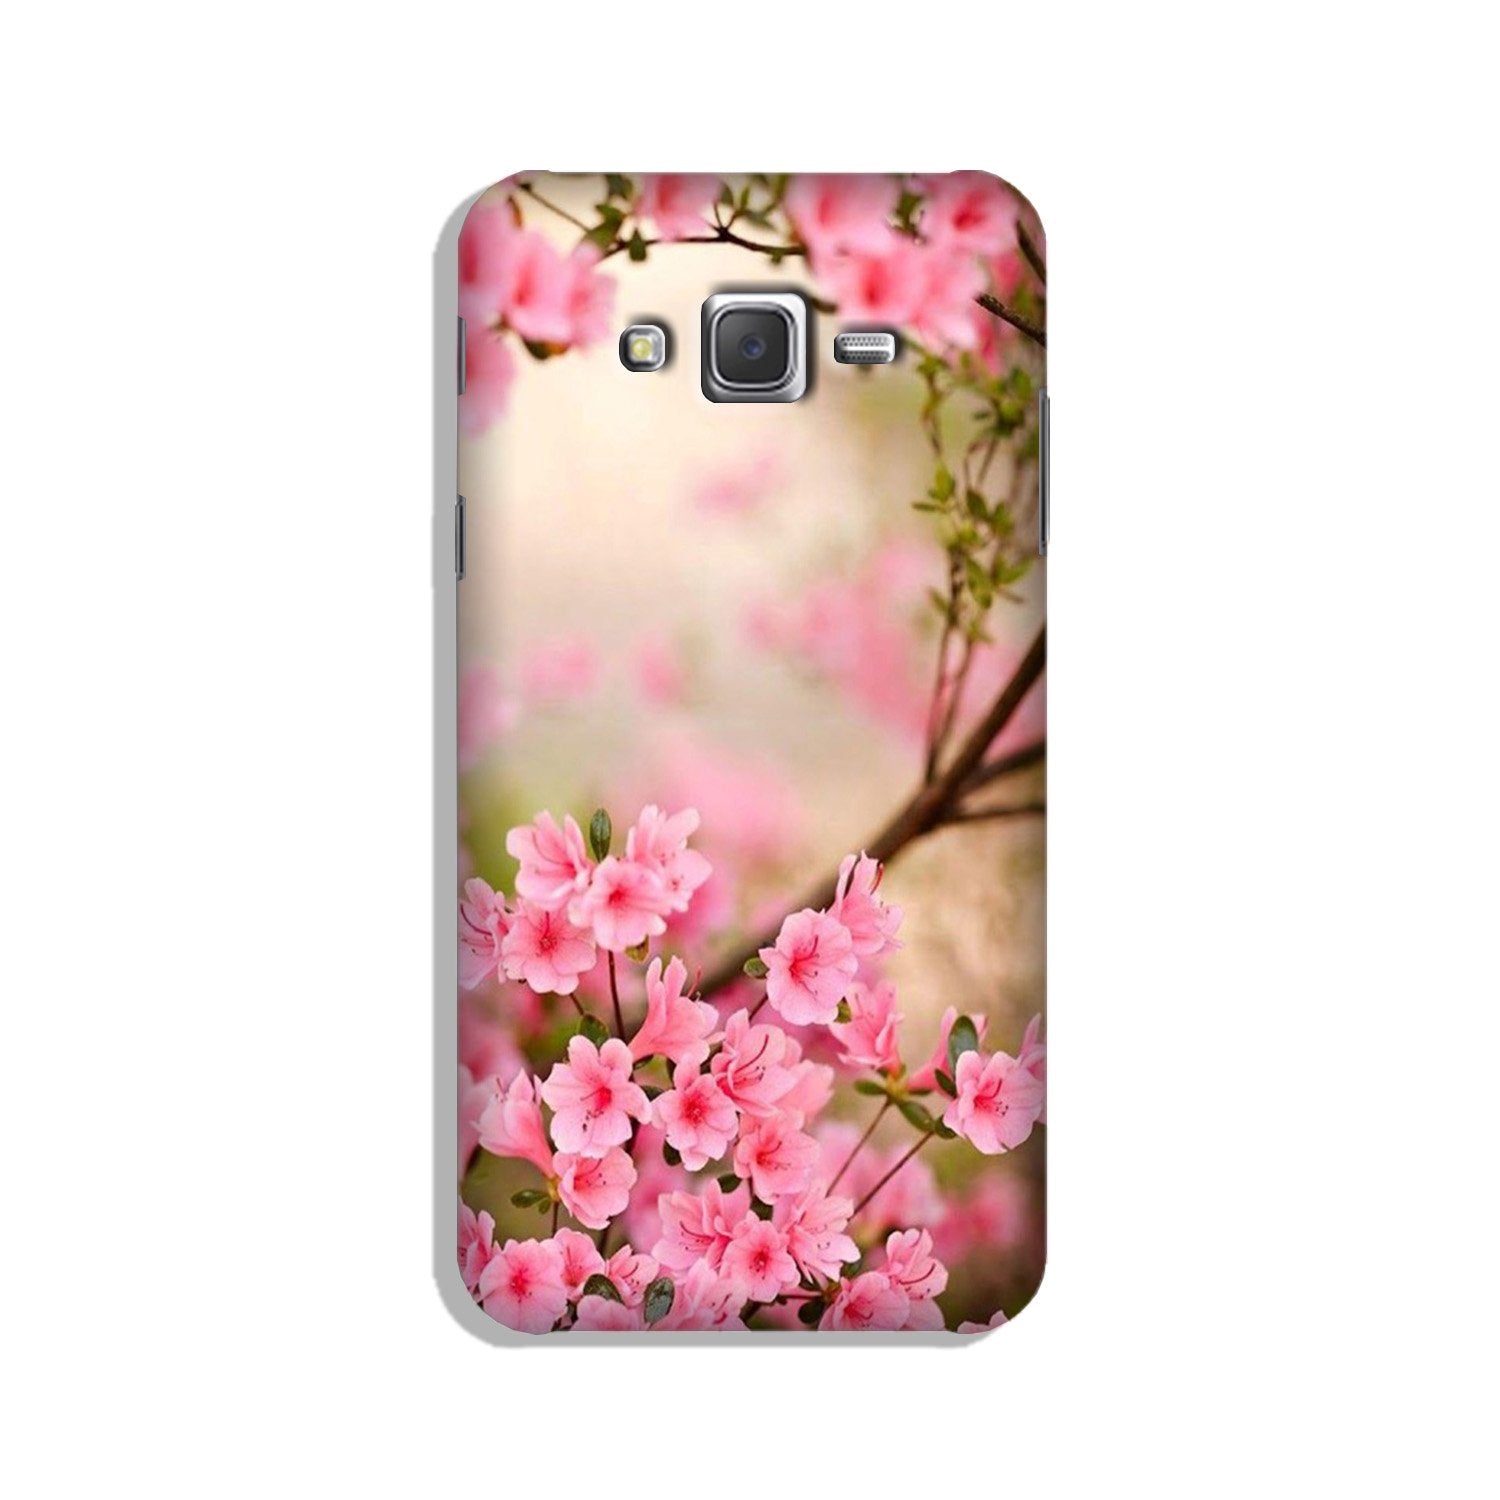 Pink flowers Case for Galaxy J5 (2015)